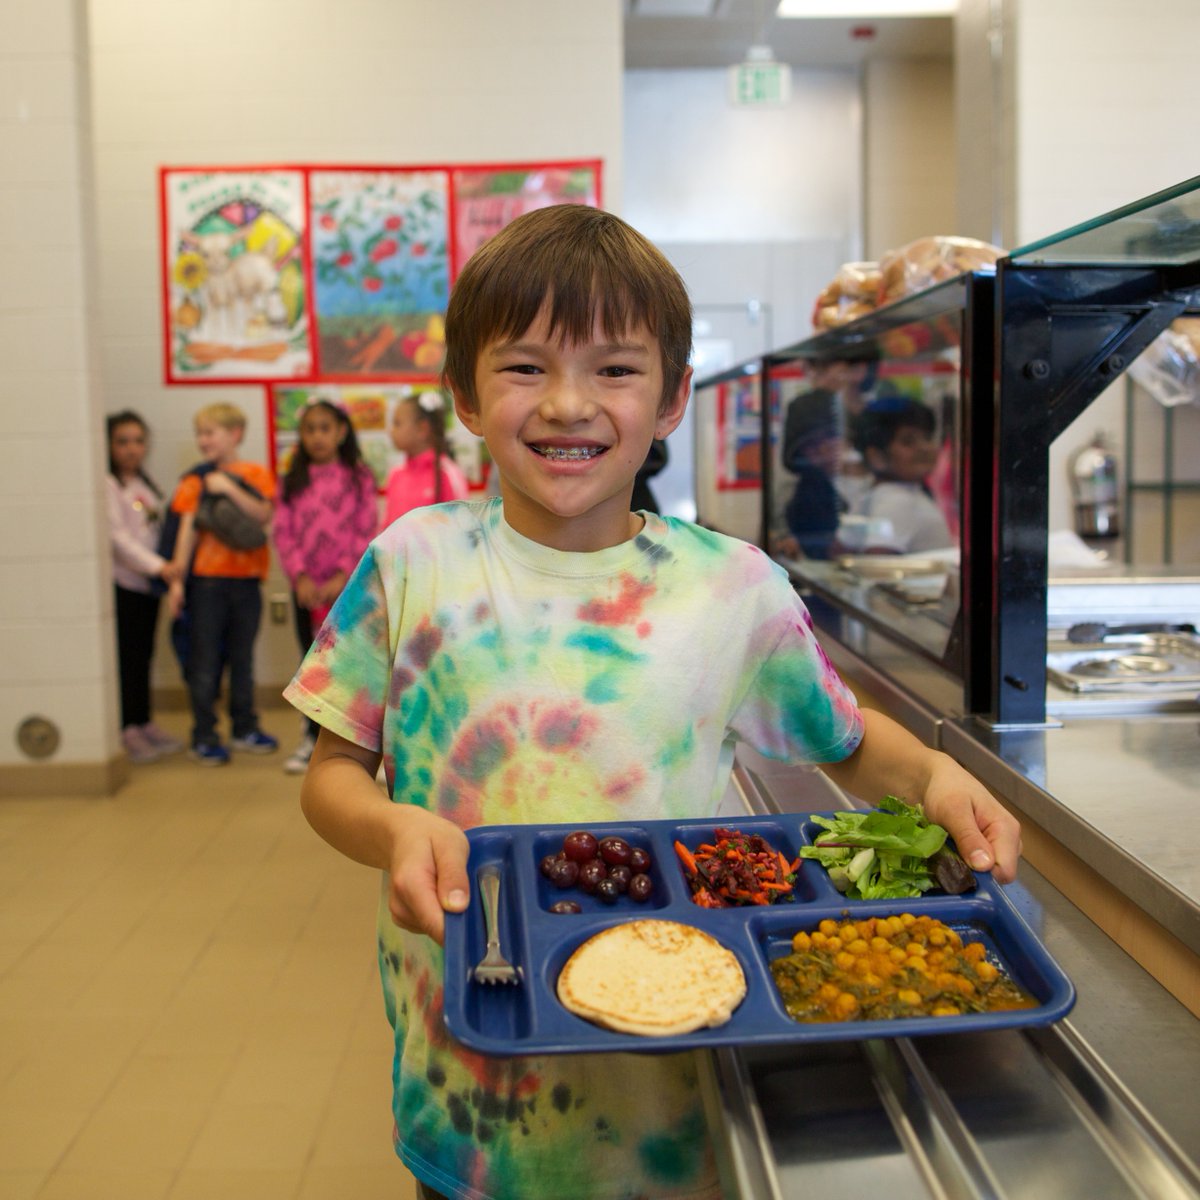 We believe that by serving scratch-cooked meals in schools, we can ensure that all kids have access to healthy food. Join us and the National Healthy School Meals for All Coalition in urging Congress to offer school meals to students nationwide at no cost: ow.ly/7U6F50Ppm8s